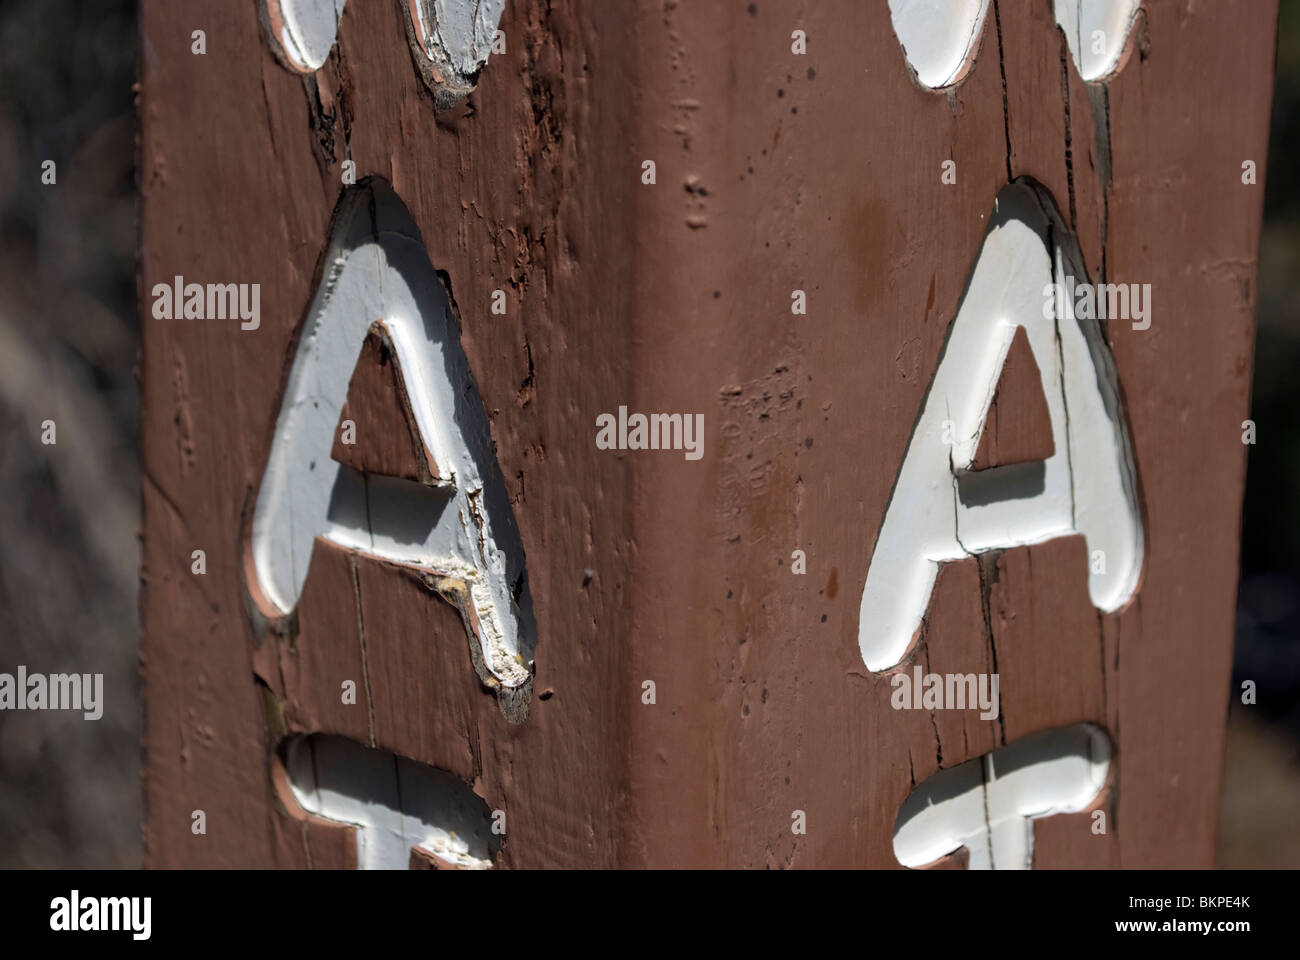 Informational wooden signpost (denoting the location of a water spigot) from with the letters A clearly incised on two sides. Stock Photo